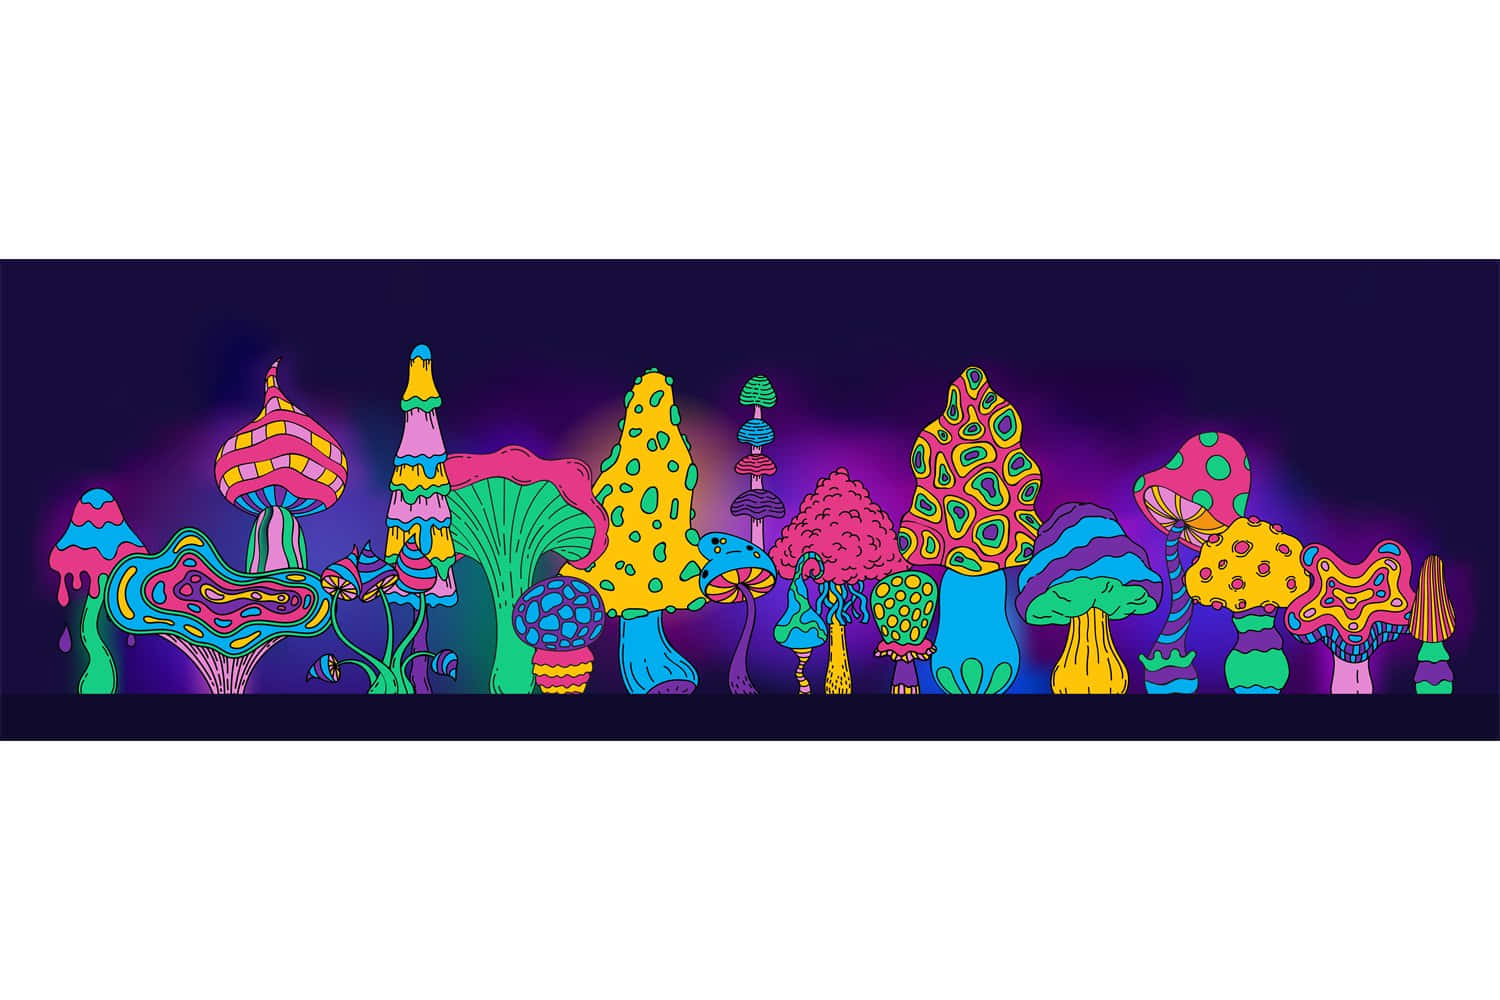 "Exploring the fascinating world of trippy mushrooms"